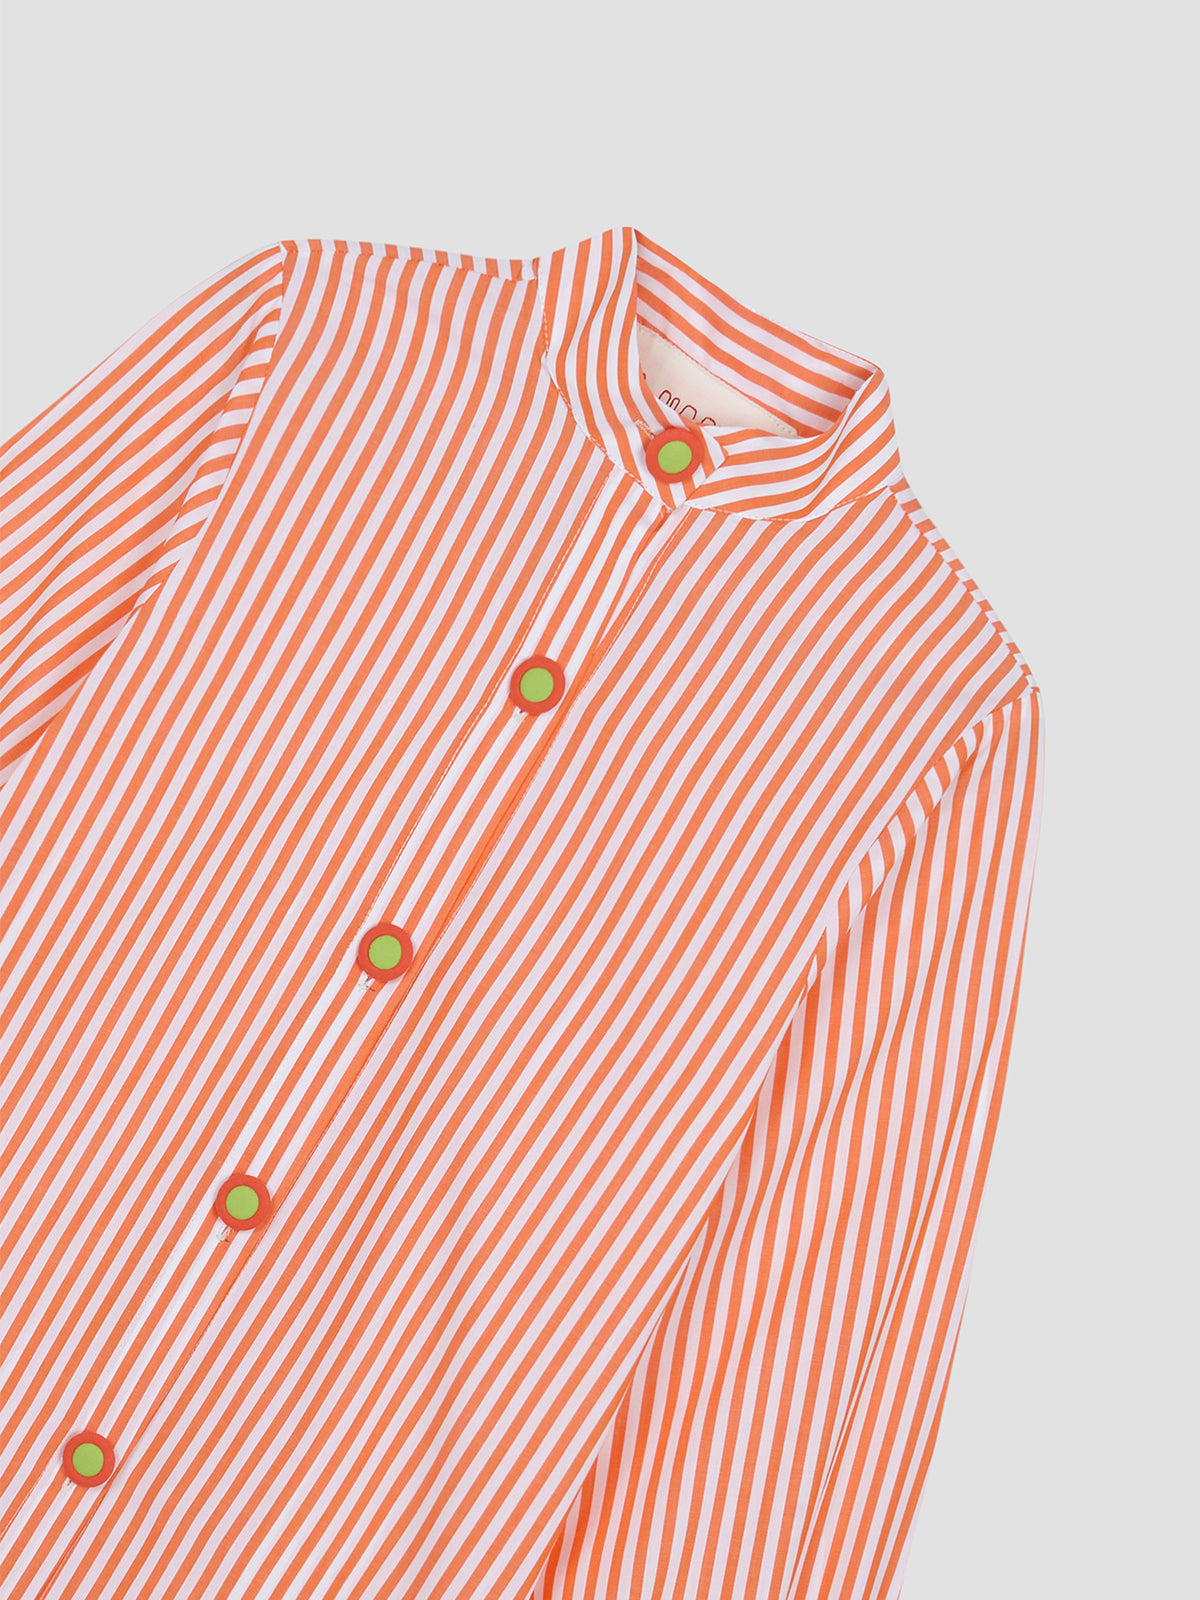 Shirt made in cotton with striped print in white and orange.